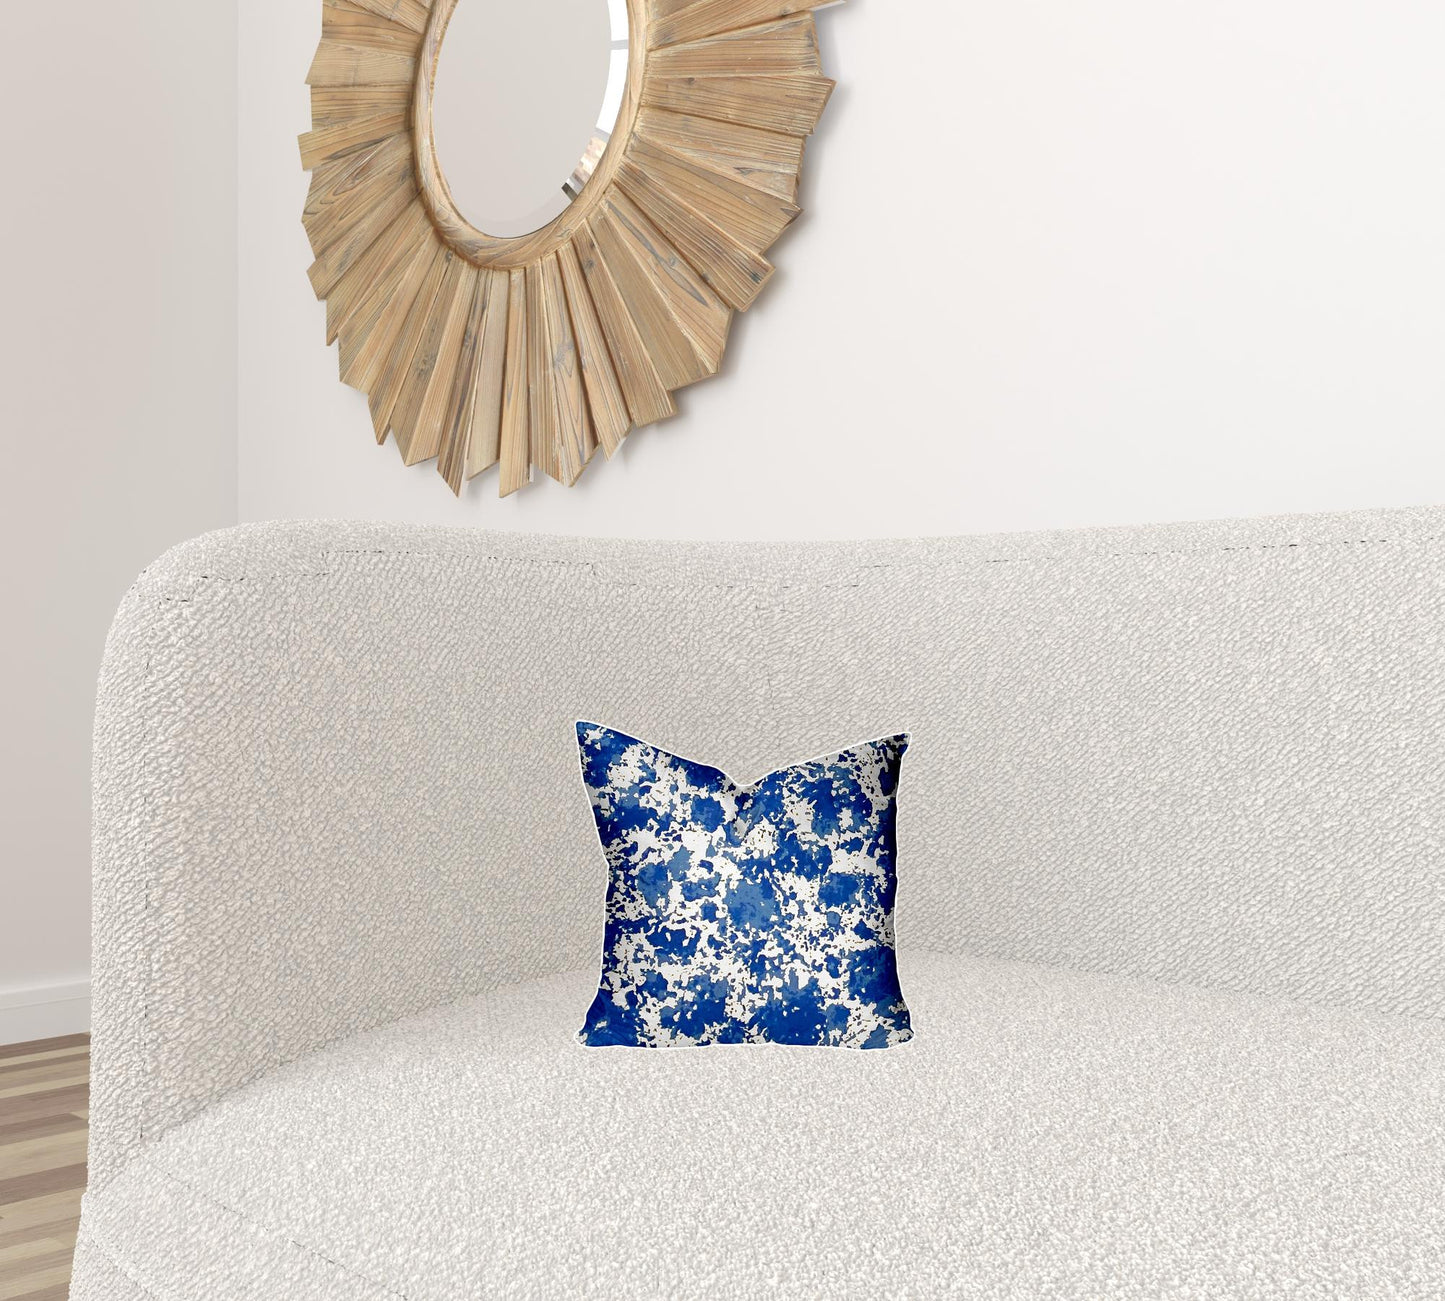 12" X 12" Blue And White Enveloped Coastal Throw Indoor Outdoor Pillow